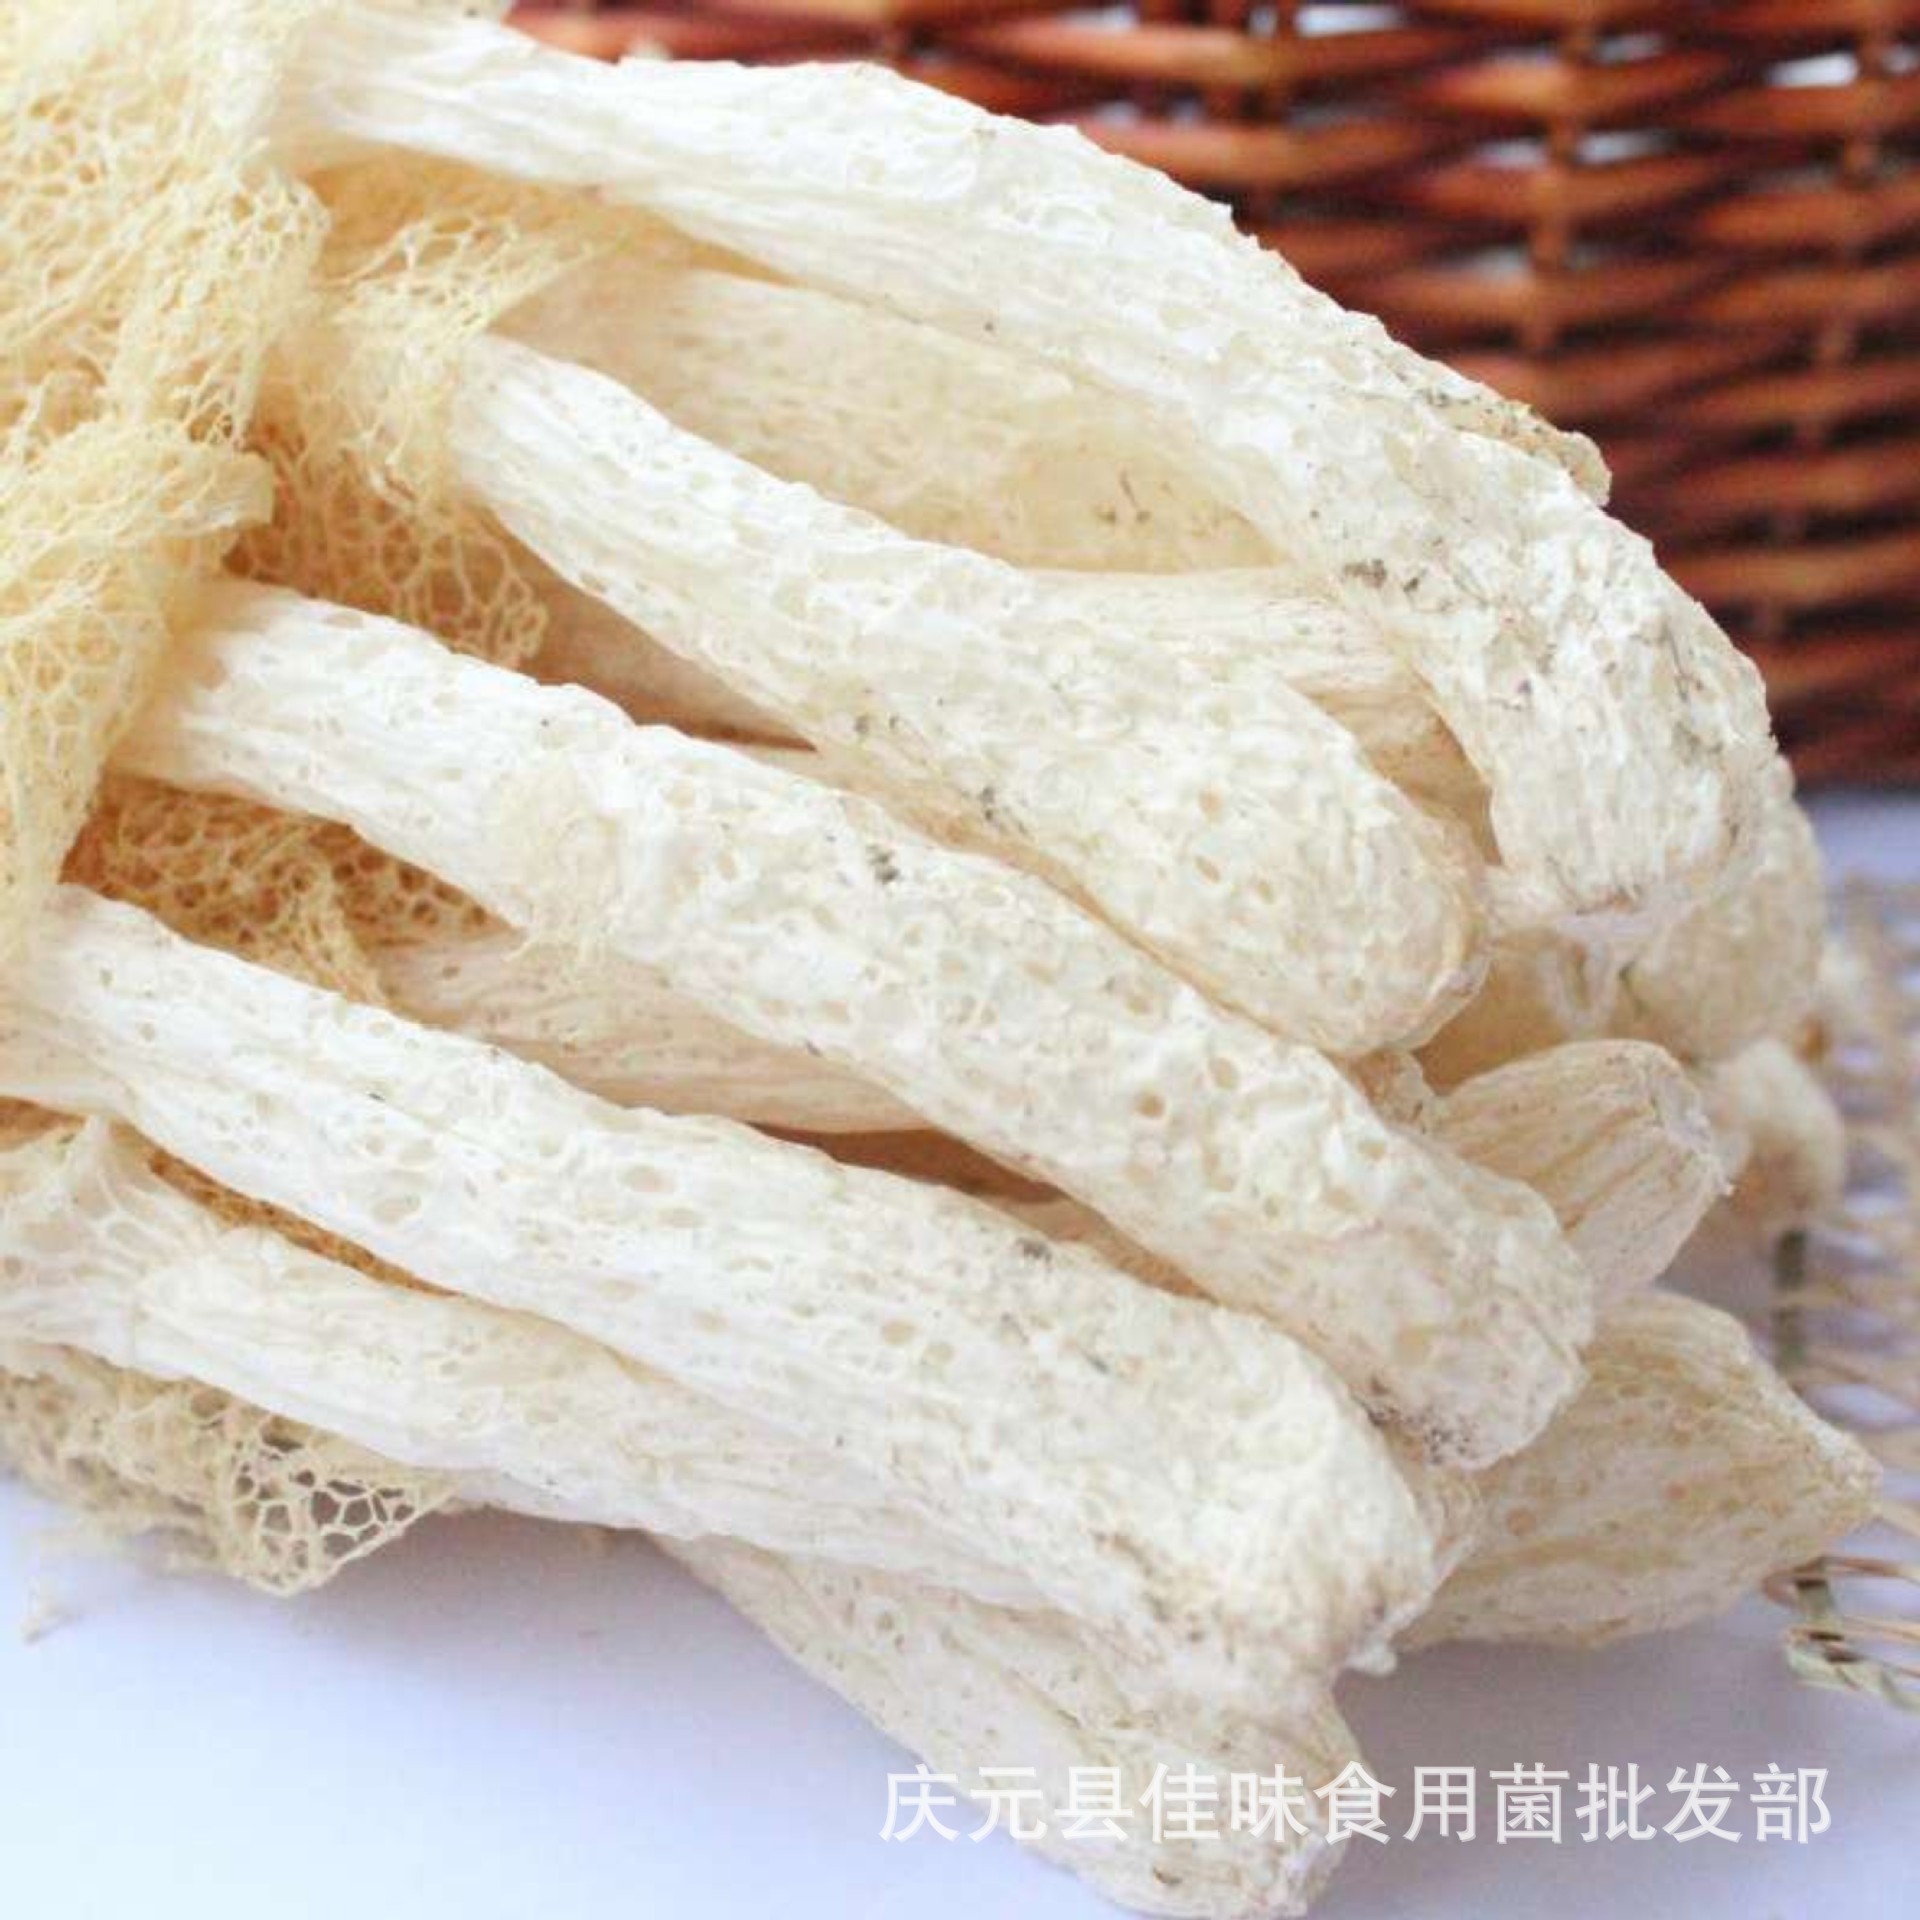 Dictyophora dried food Sulfur Farm Qingyuan specialty Bamboo fungus Mushroom mushrooms Dome Outside new goods Place of Origin